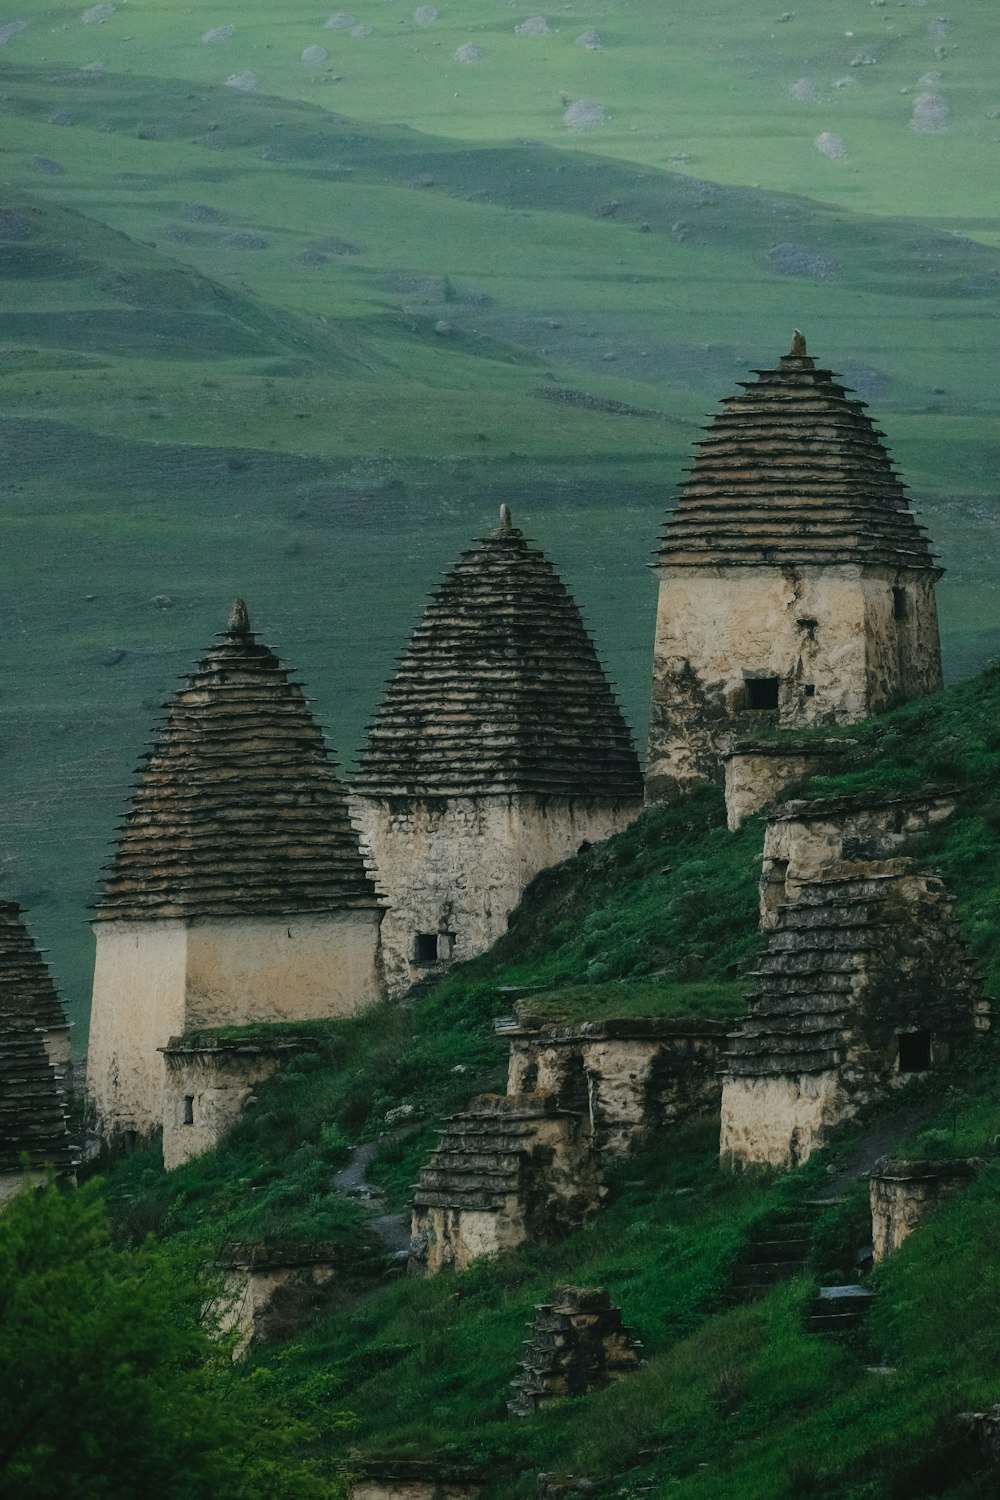 a group of buildings sitting on top of a lush green hillside